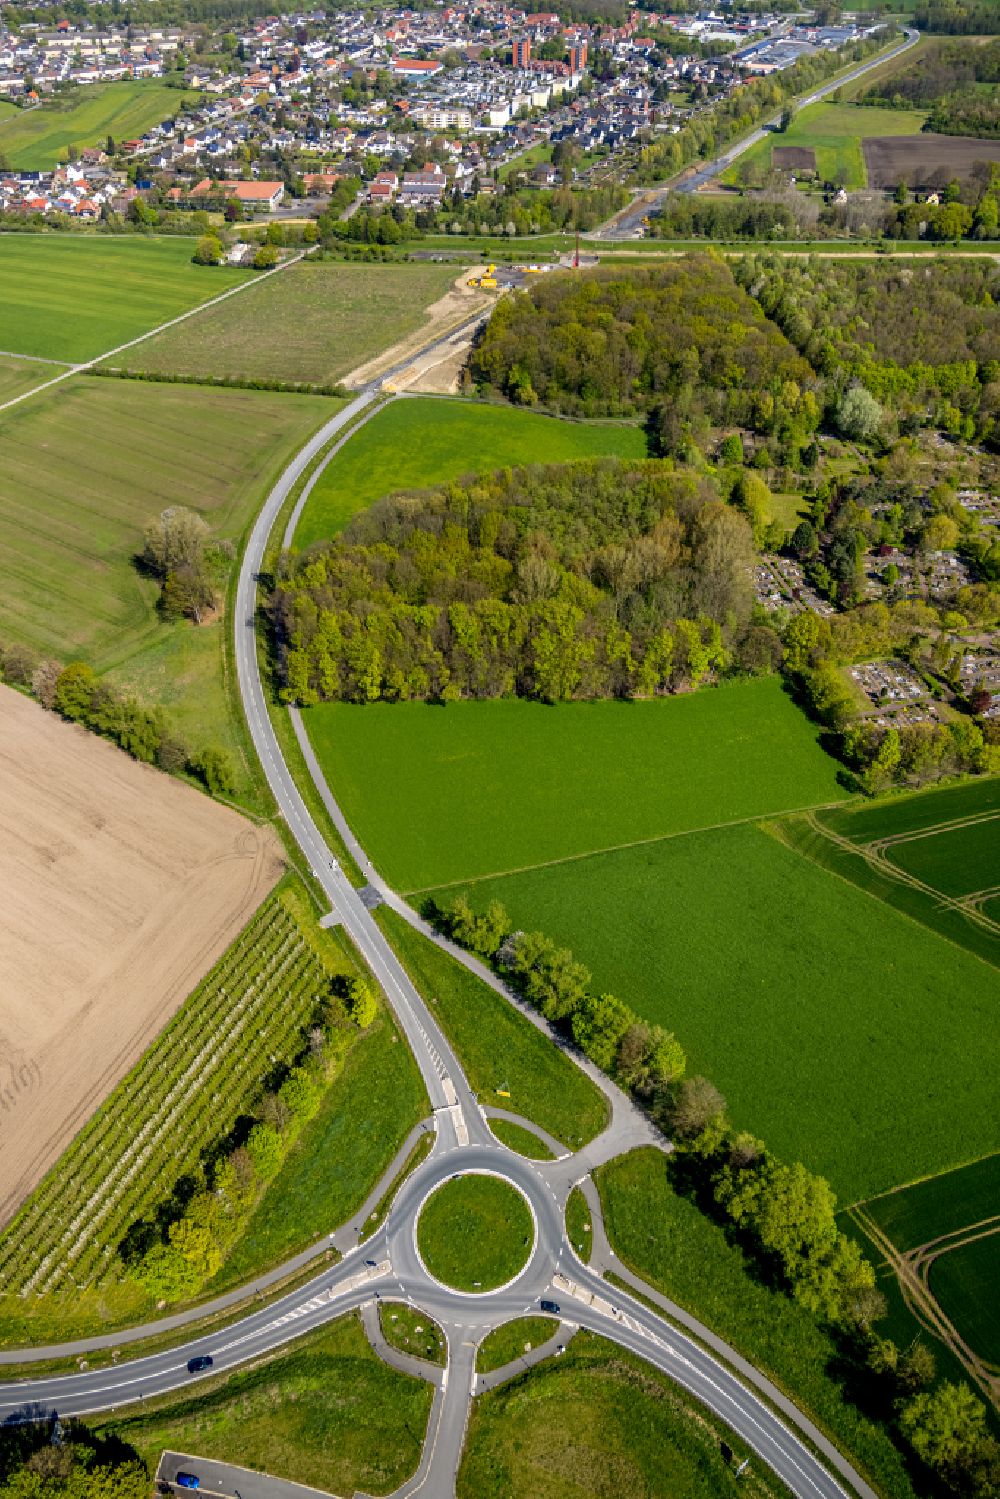 Bergkamen from the bird's eye view: Traffic management of the roundabout road on Luenener Strasse in Bergkamen in the state North Rhine-Westphalia, Germany